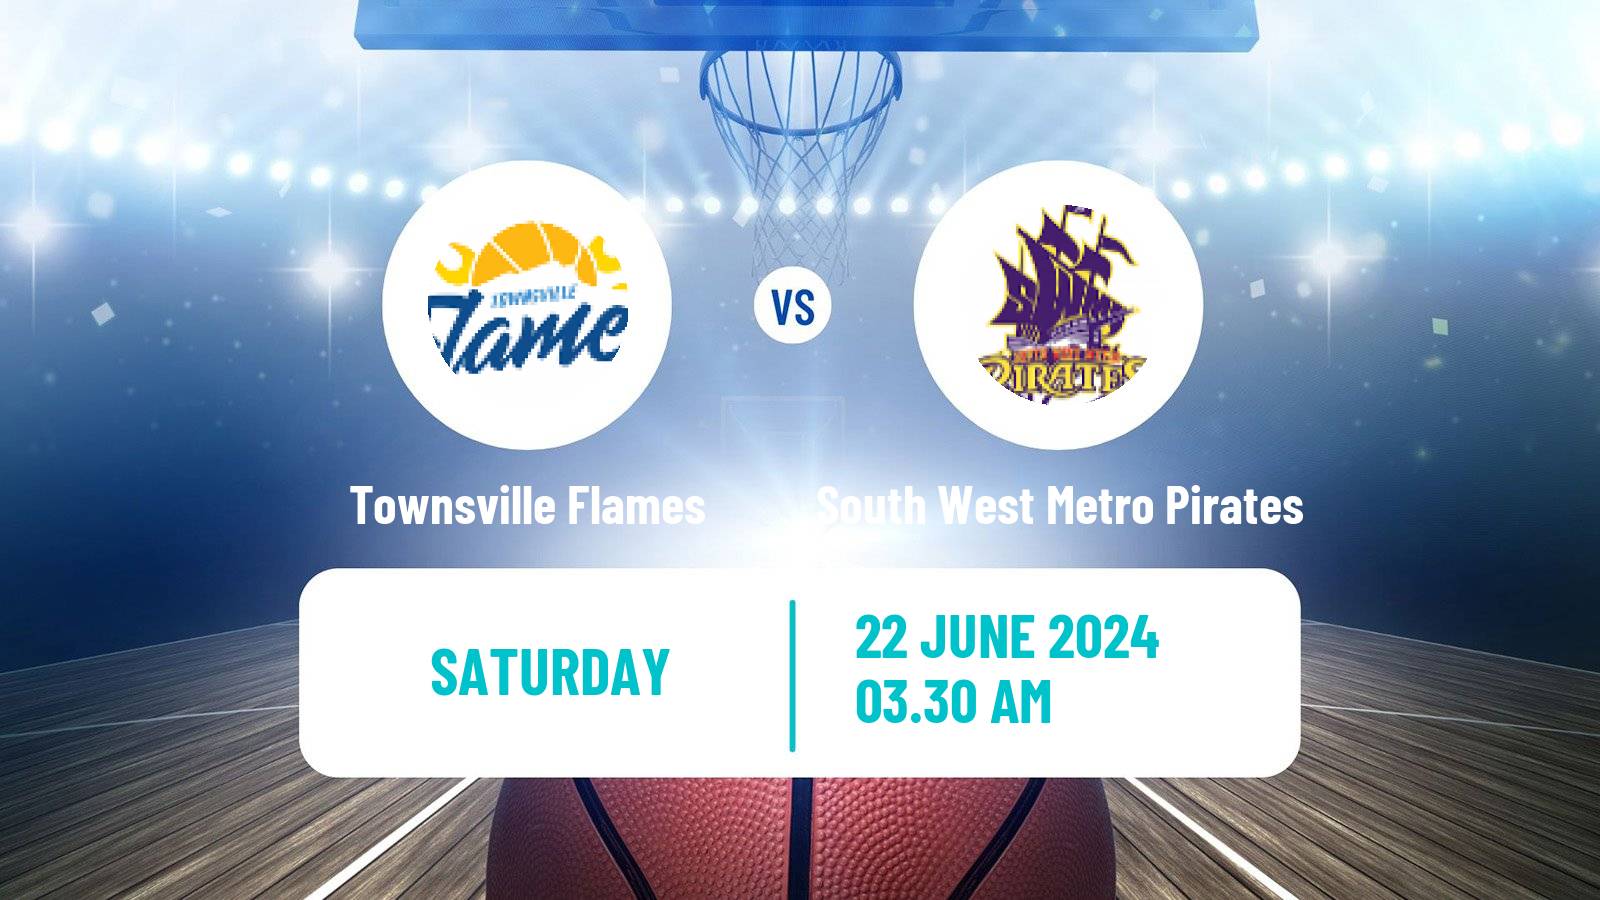 Basketball Australian NBL1 North Women Townsville Flames - South West Metro Pirates